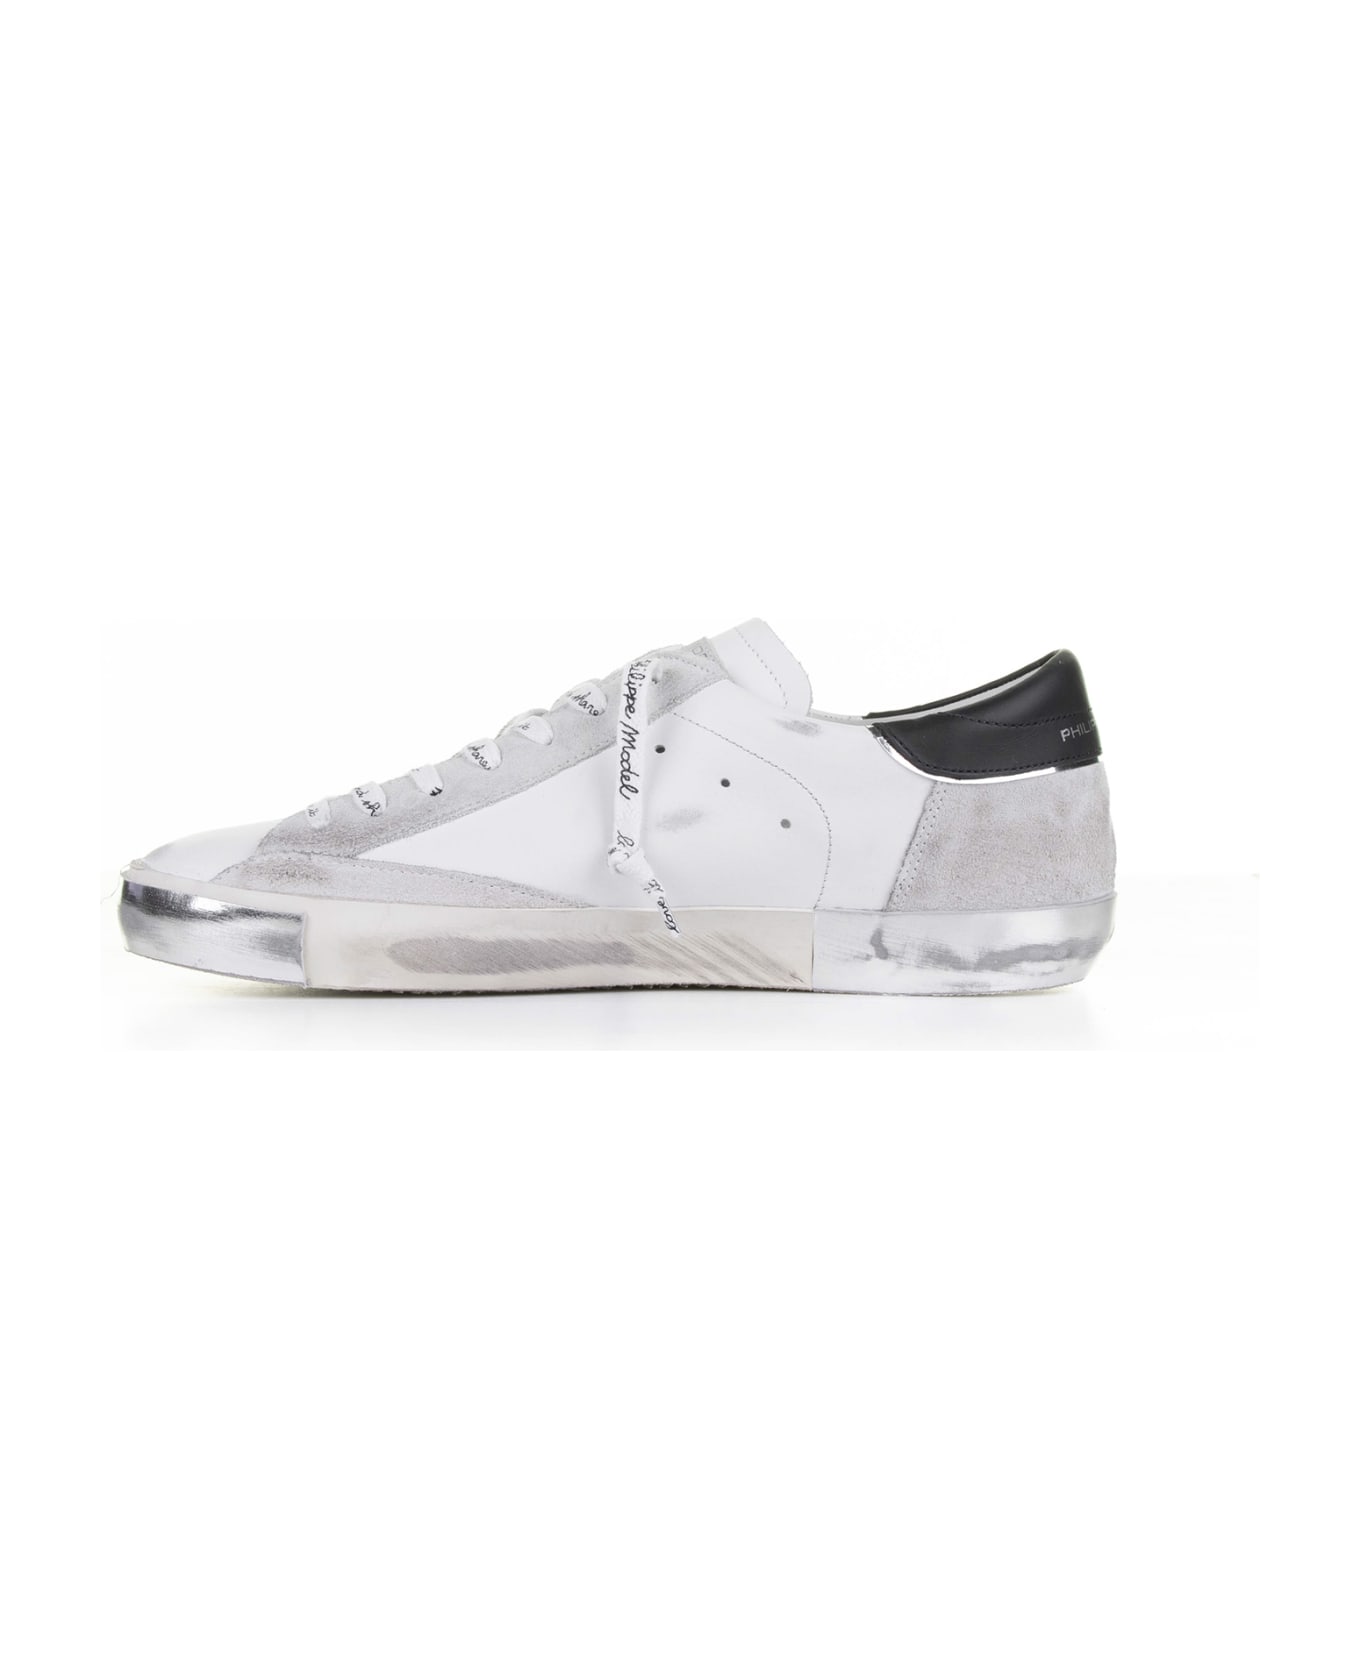 Philippe Model Prsx Sneakers White Silver Women - BLANC ARGENT